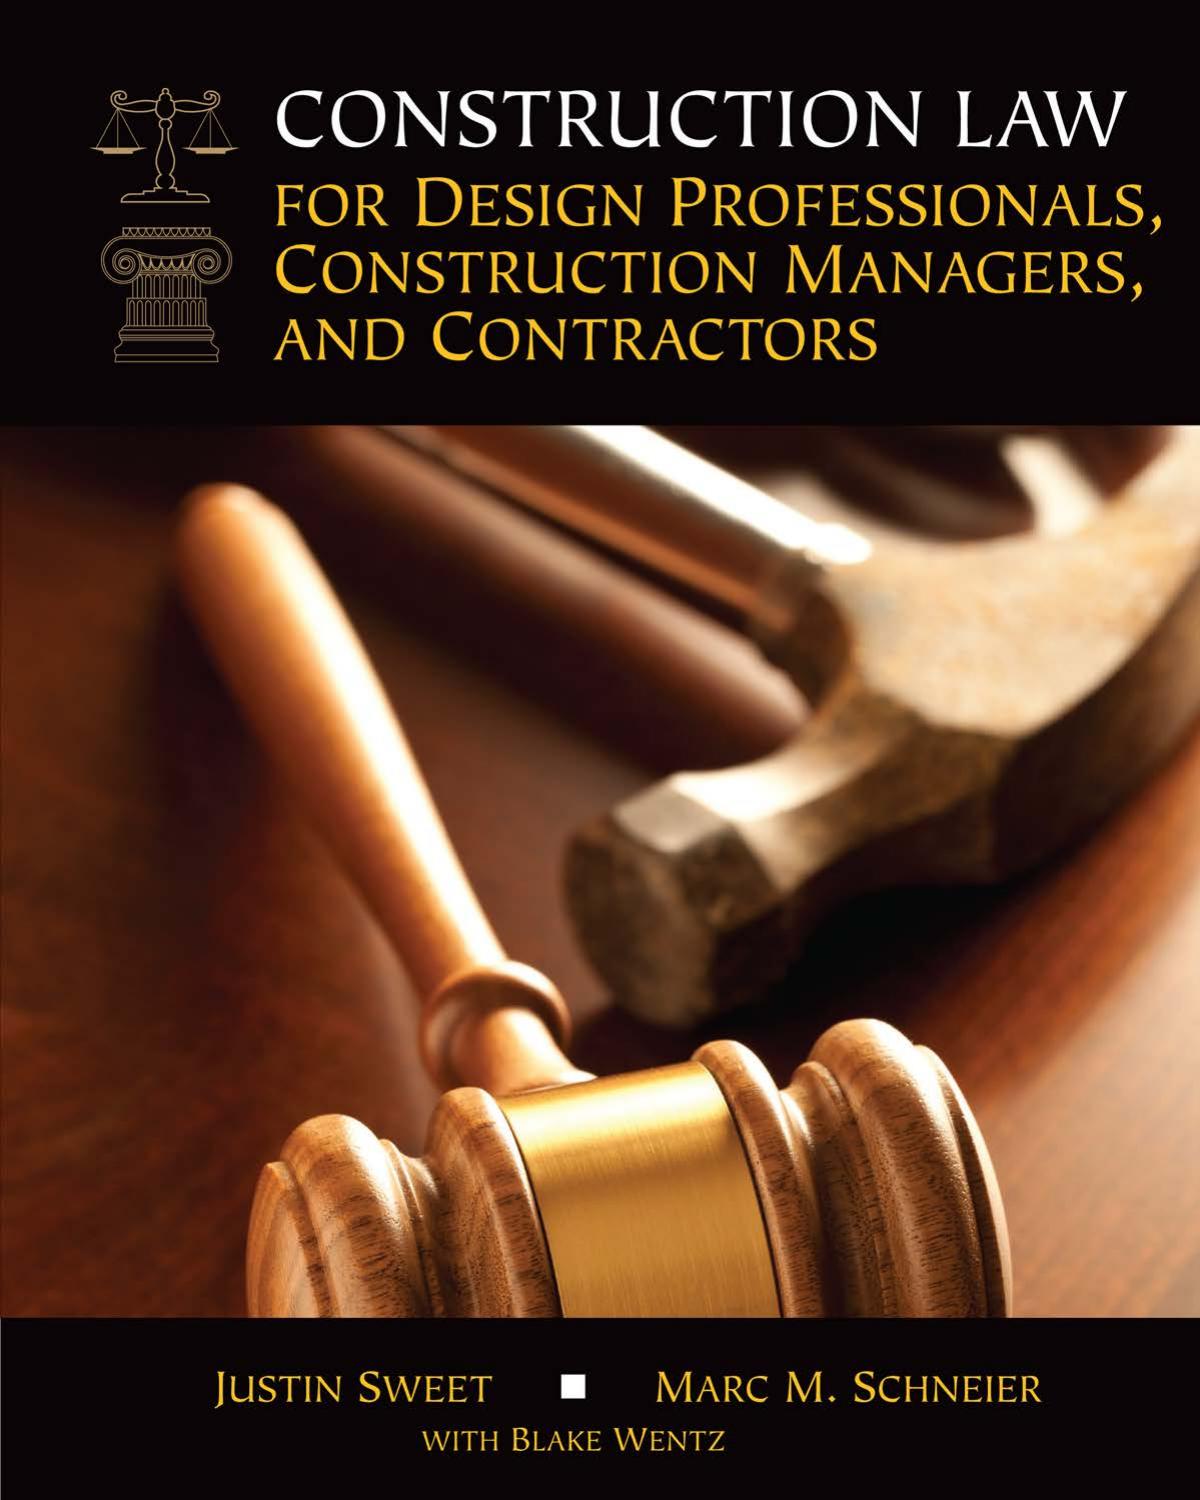 Construction Law for Design Professionals,Construction Managers and Contractors.jpg